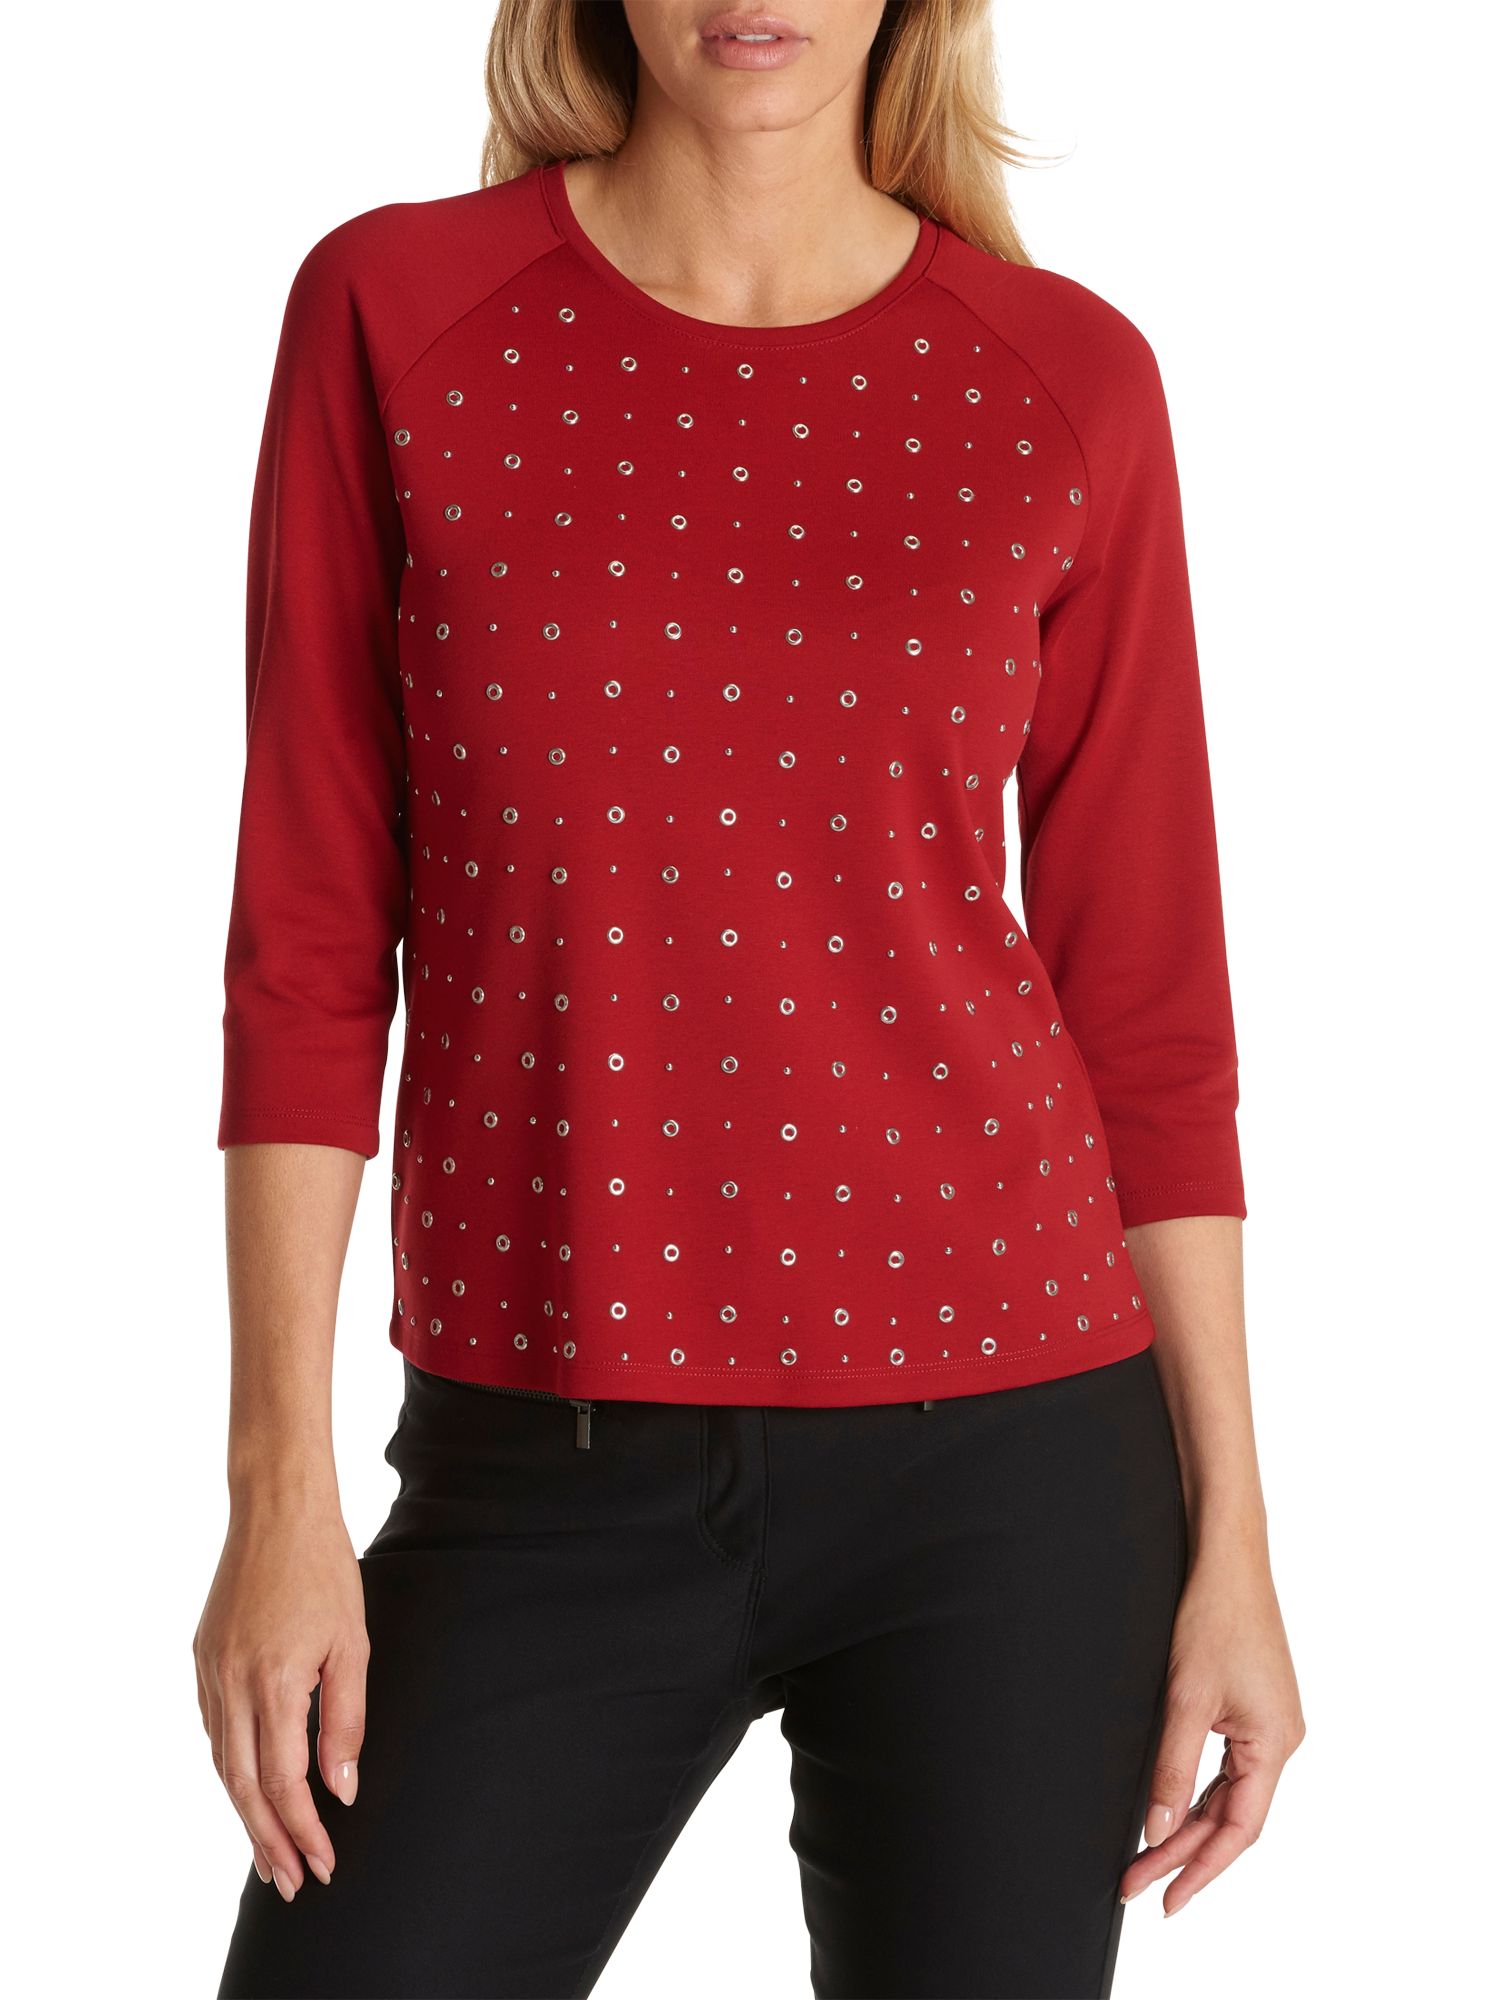 Betty Barclay Embellished Studded Top, Red